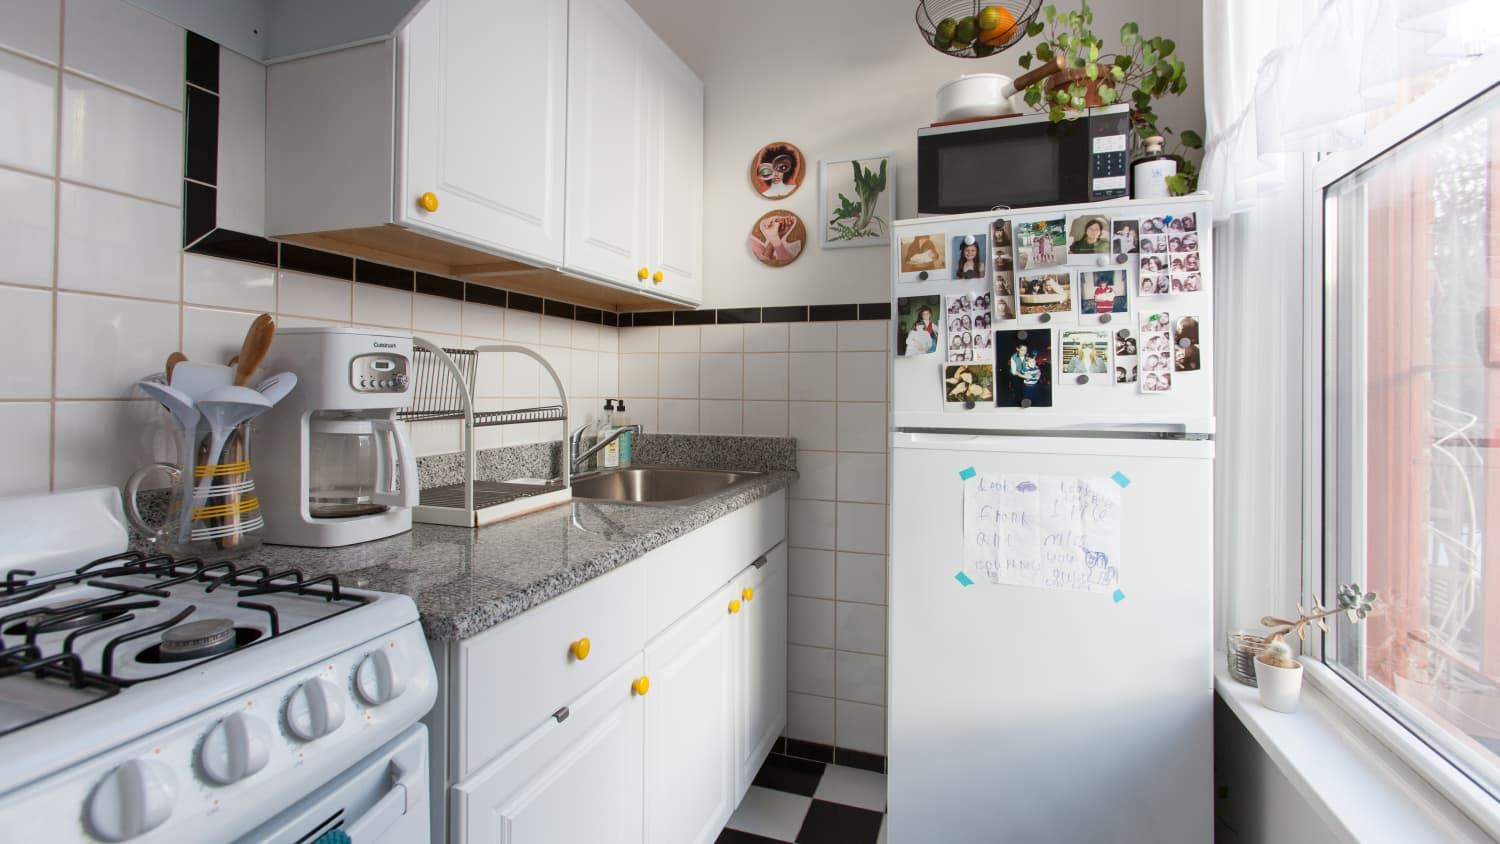 How to Organize a Small Apartment Kitchen: A 7-Step Plan